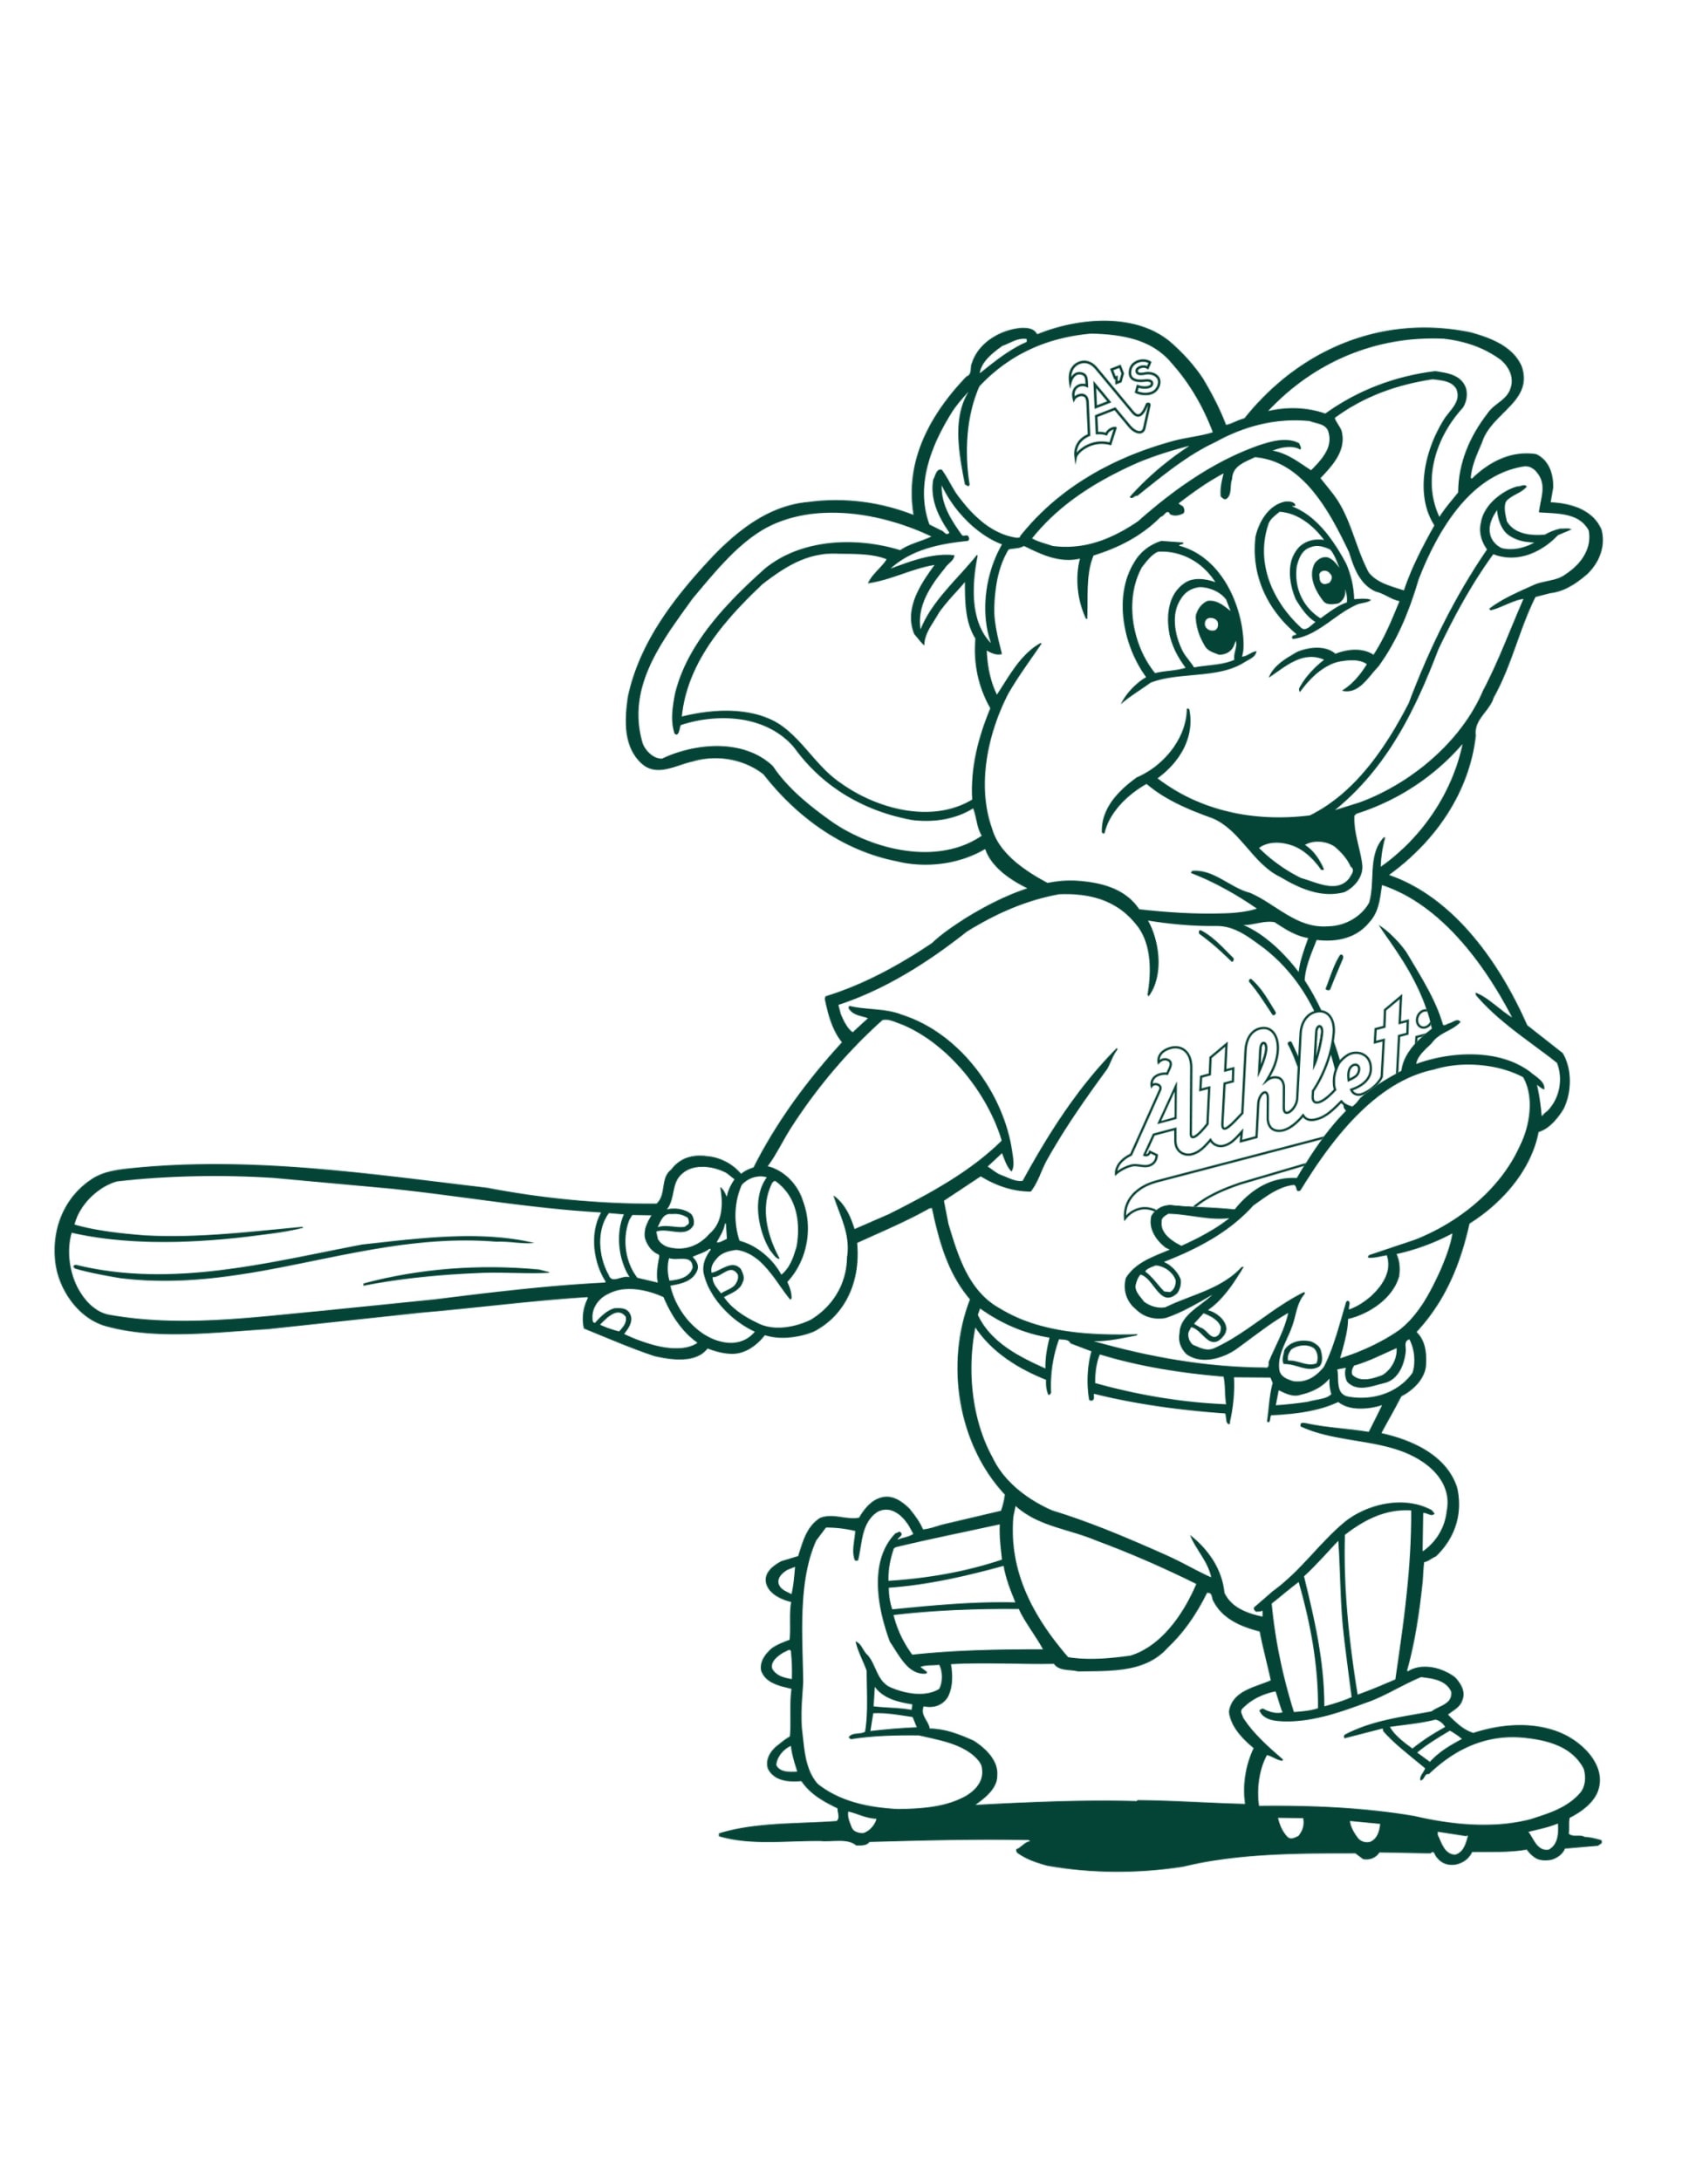 oakland athletics mascot coloring pages